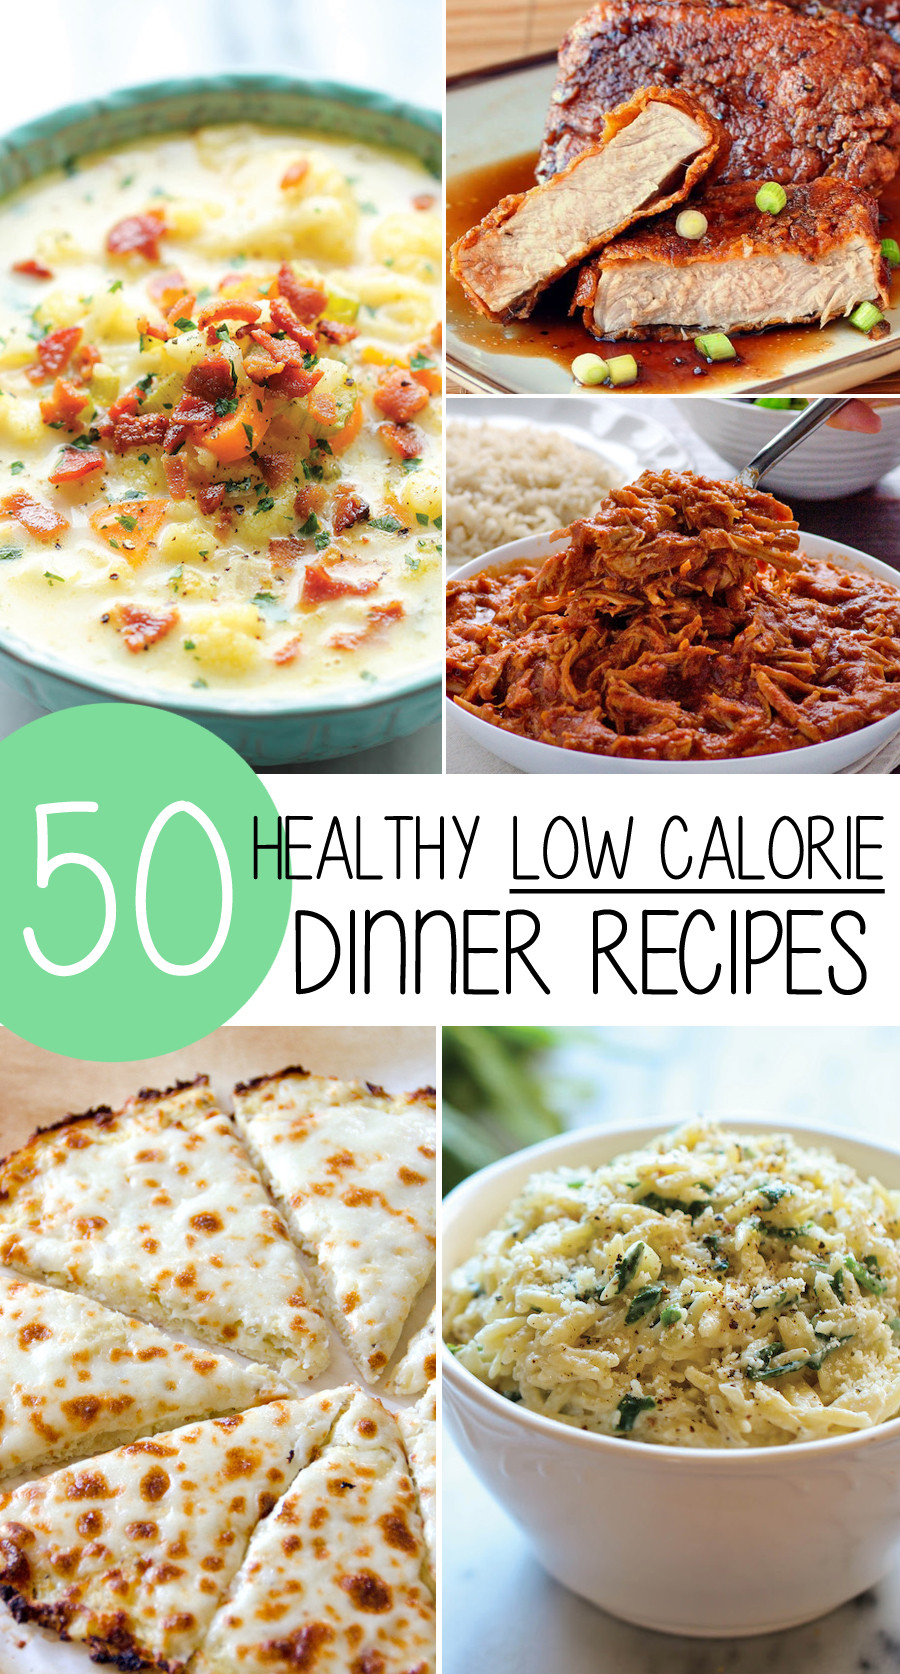 Healthy Low Calorie Dinner Recipes Inspirational 50 Healthy Low Calorie Weight Loss Dinner Recipes